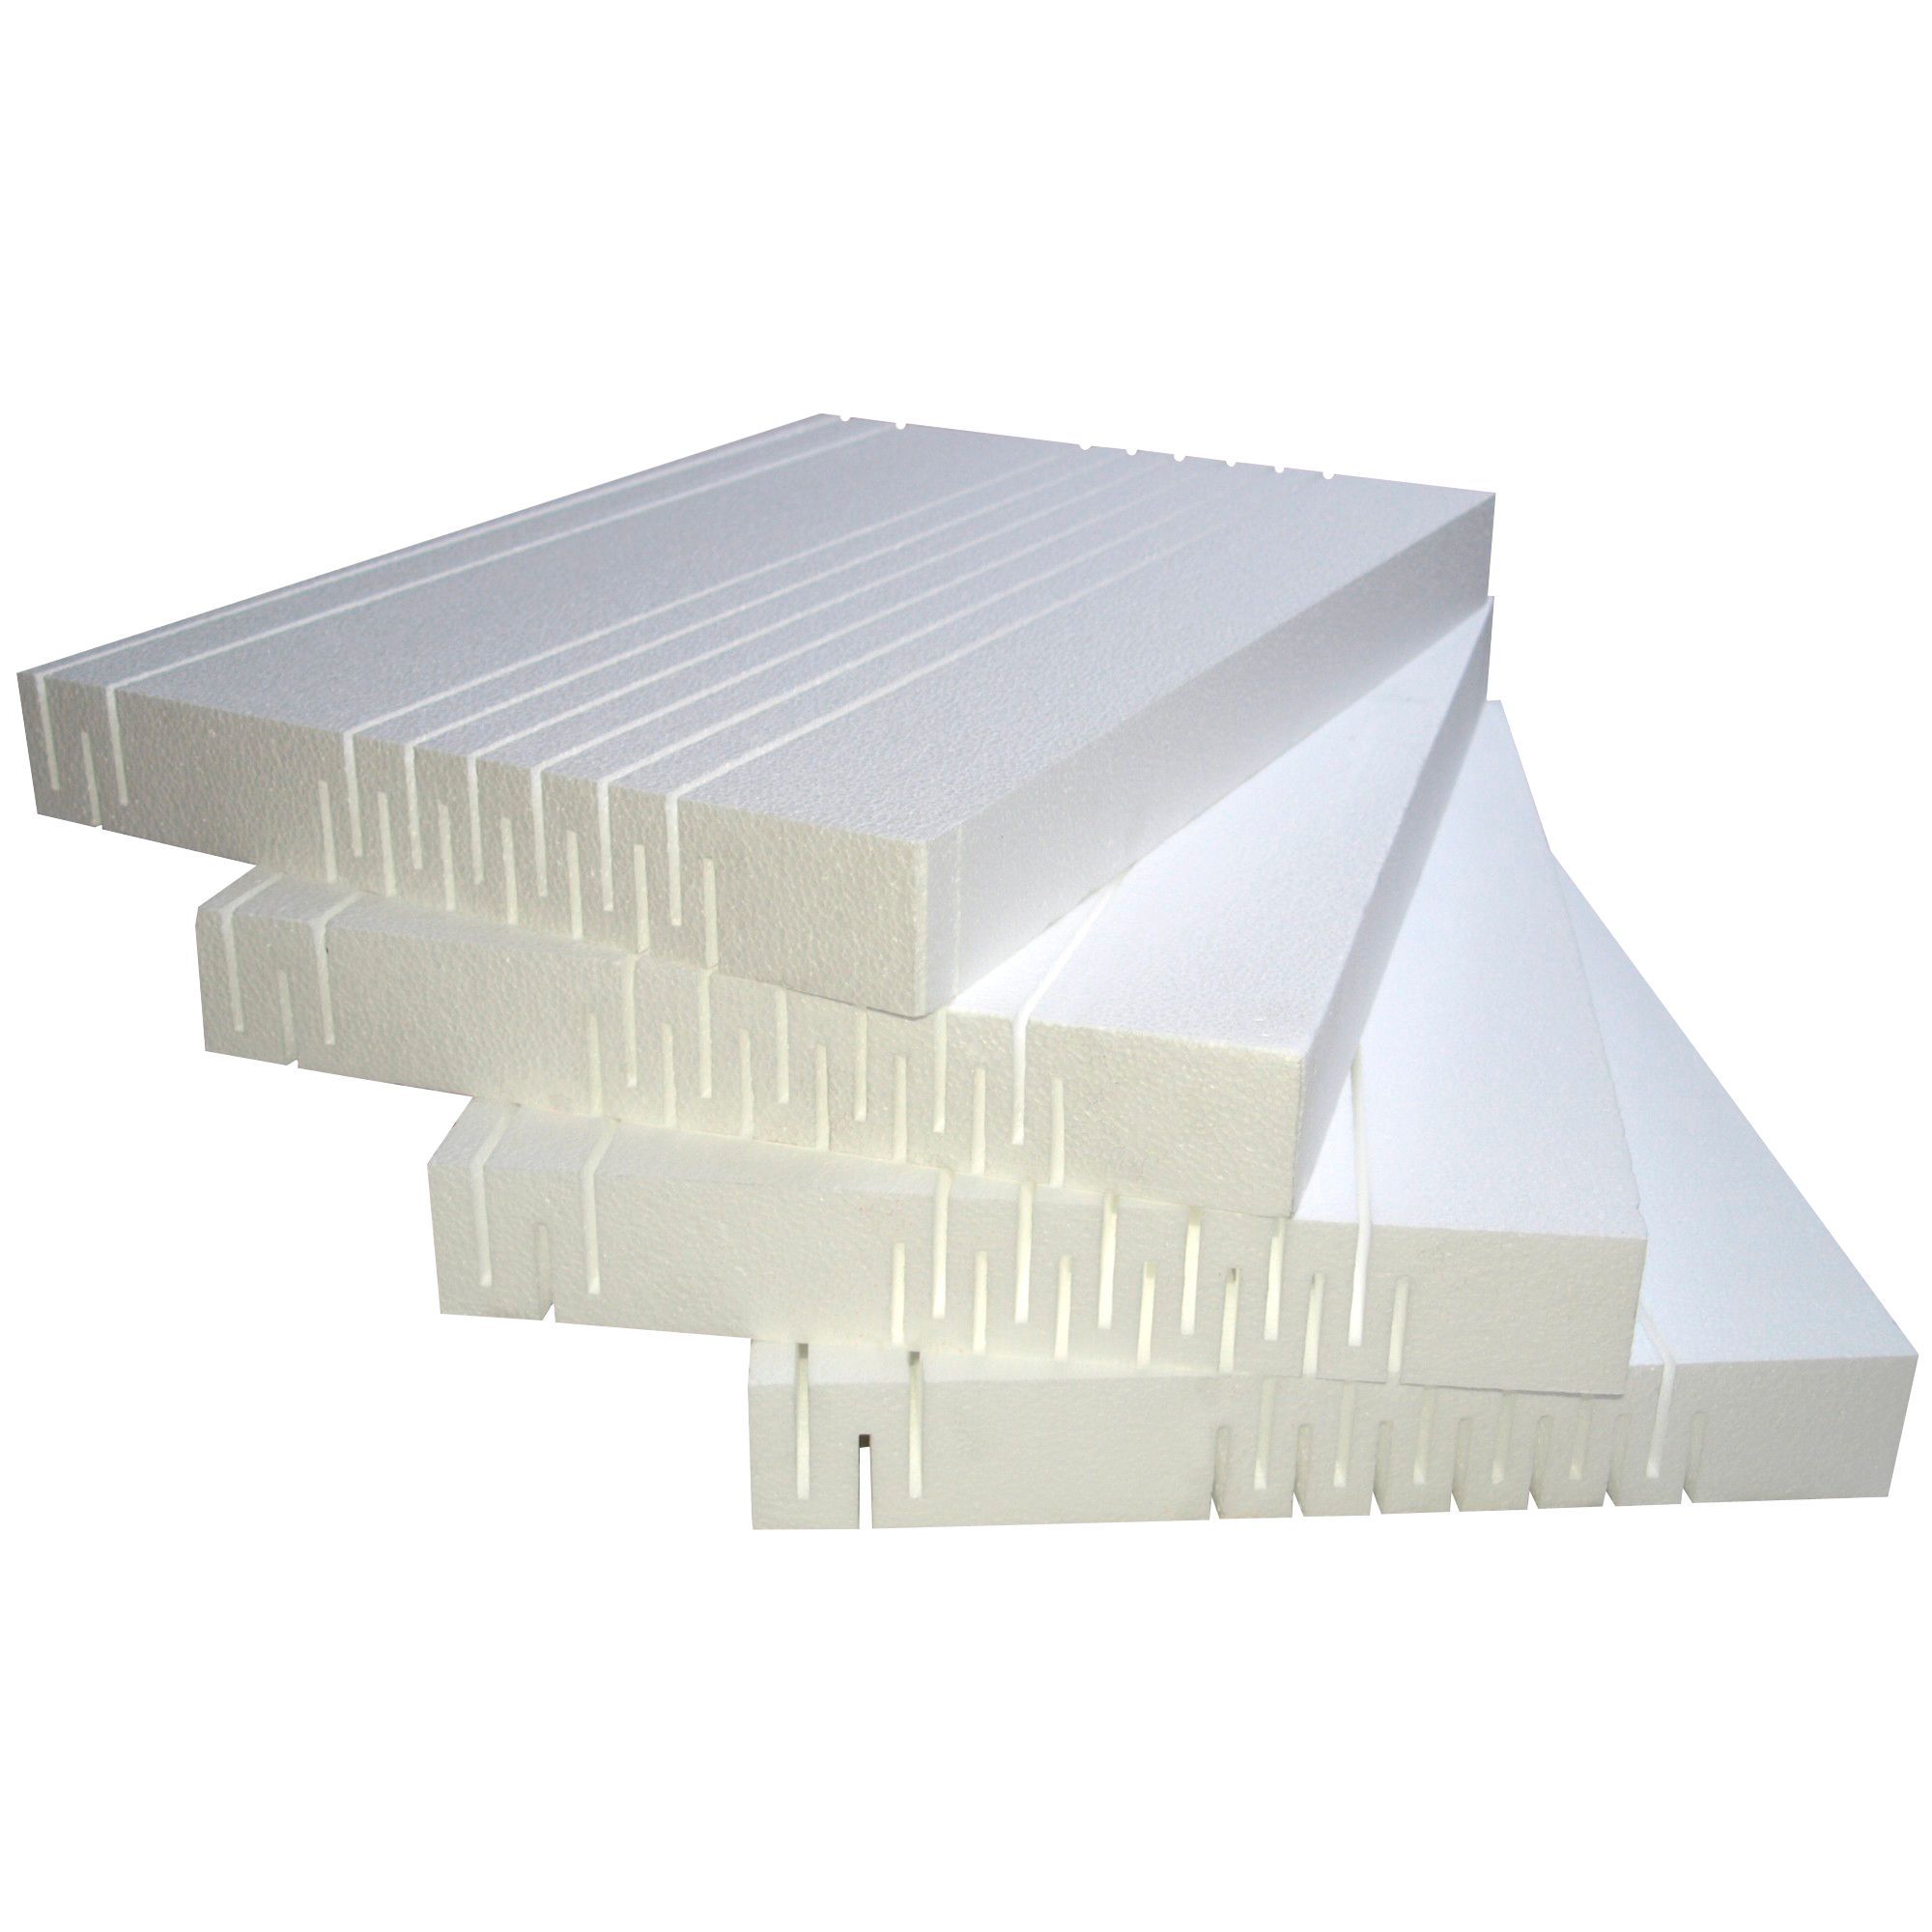 Polystyrene Insulation Board L 0 61m W 0 4m T 60mm Pack Of 4 Departments Diy At B Q